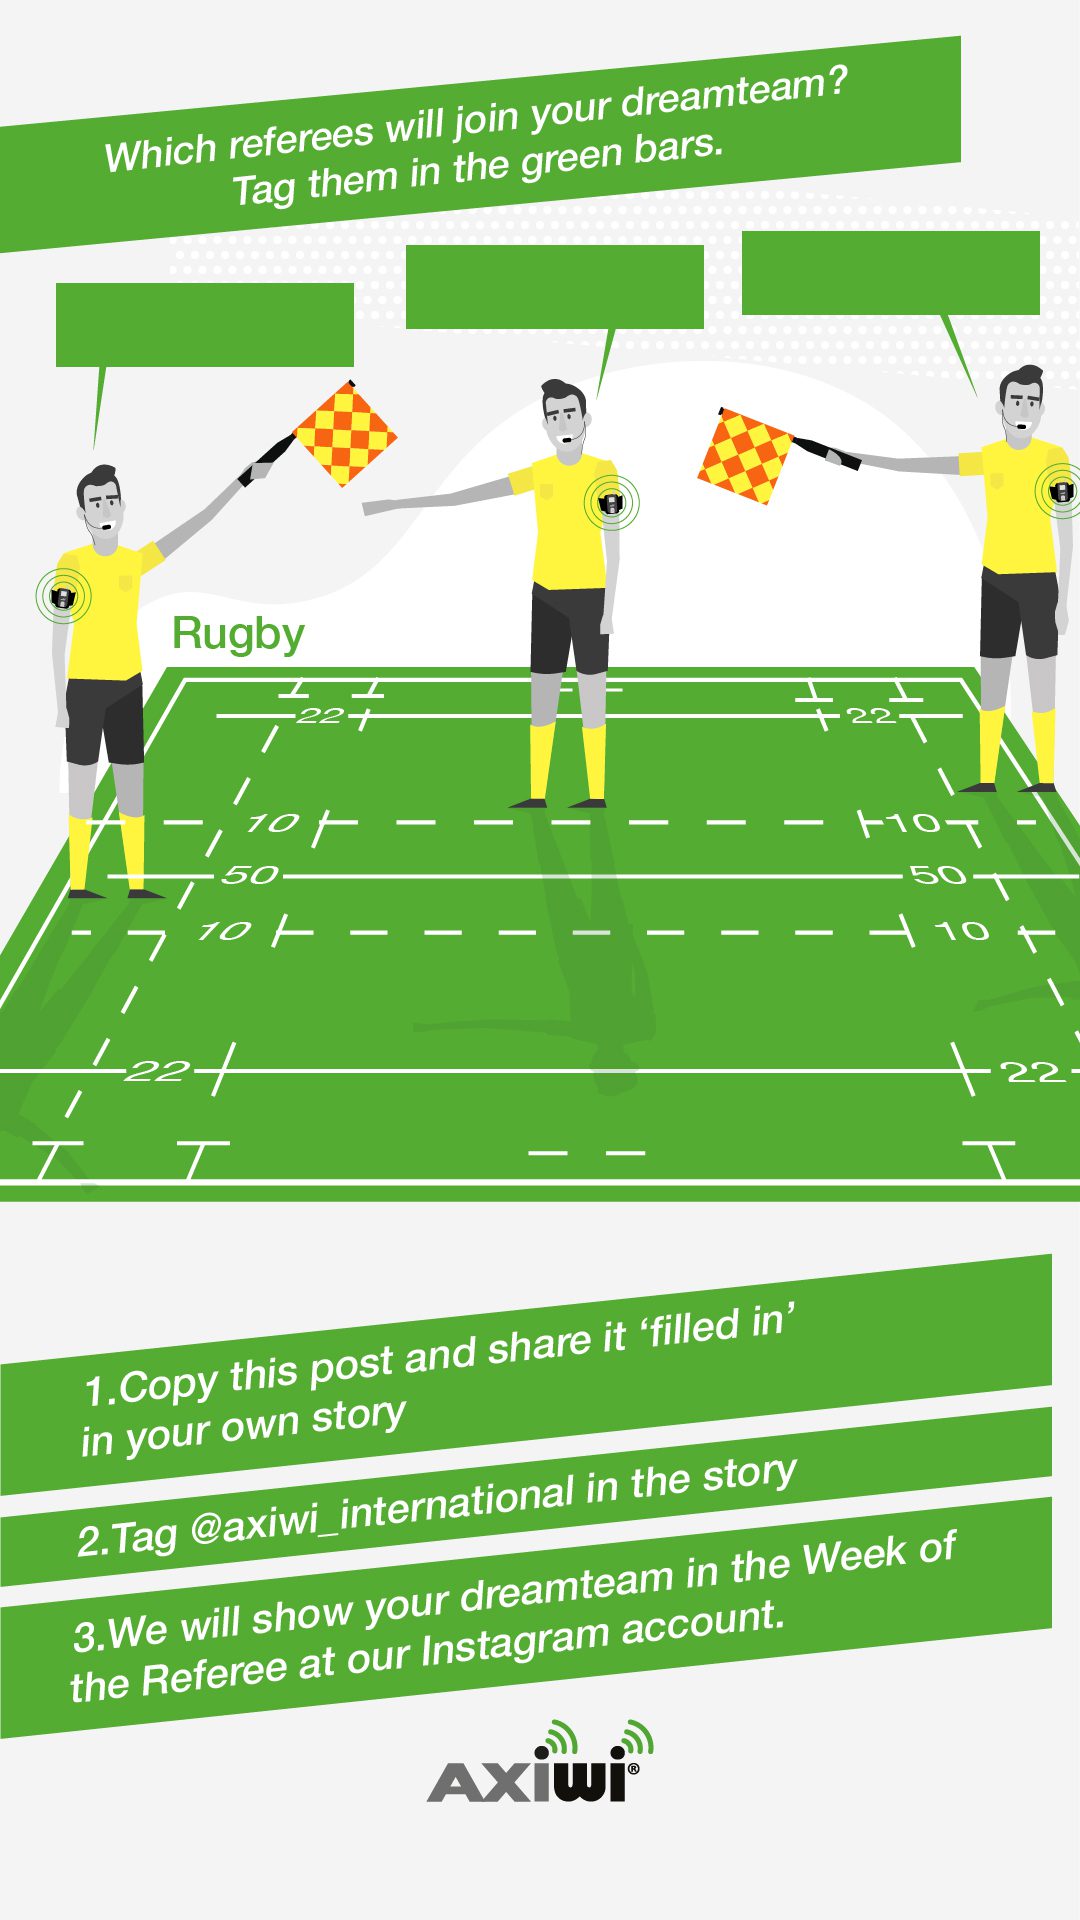 axiwi-dreamteam-rugby